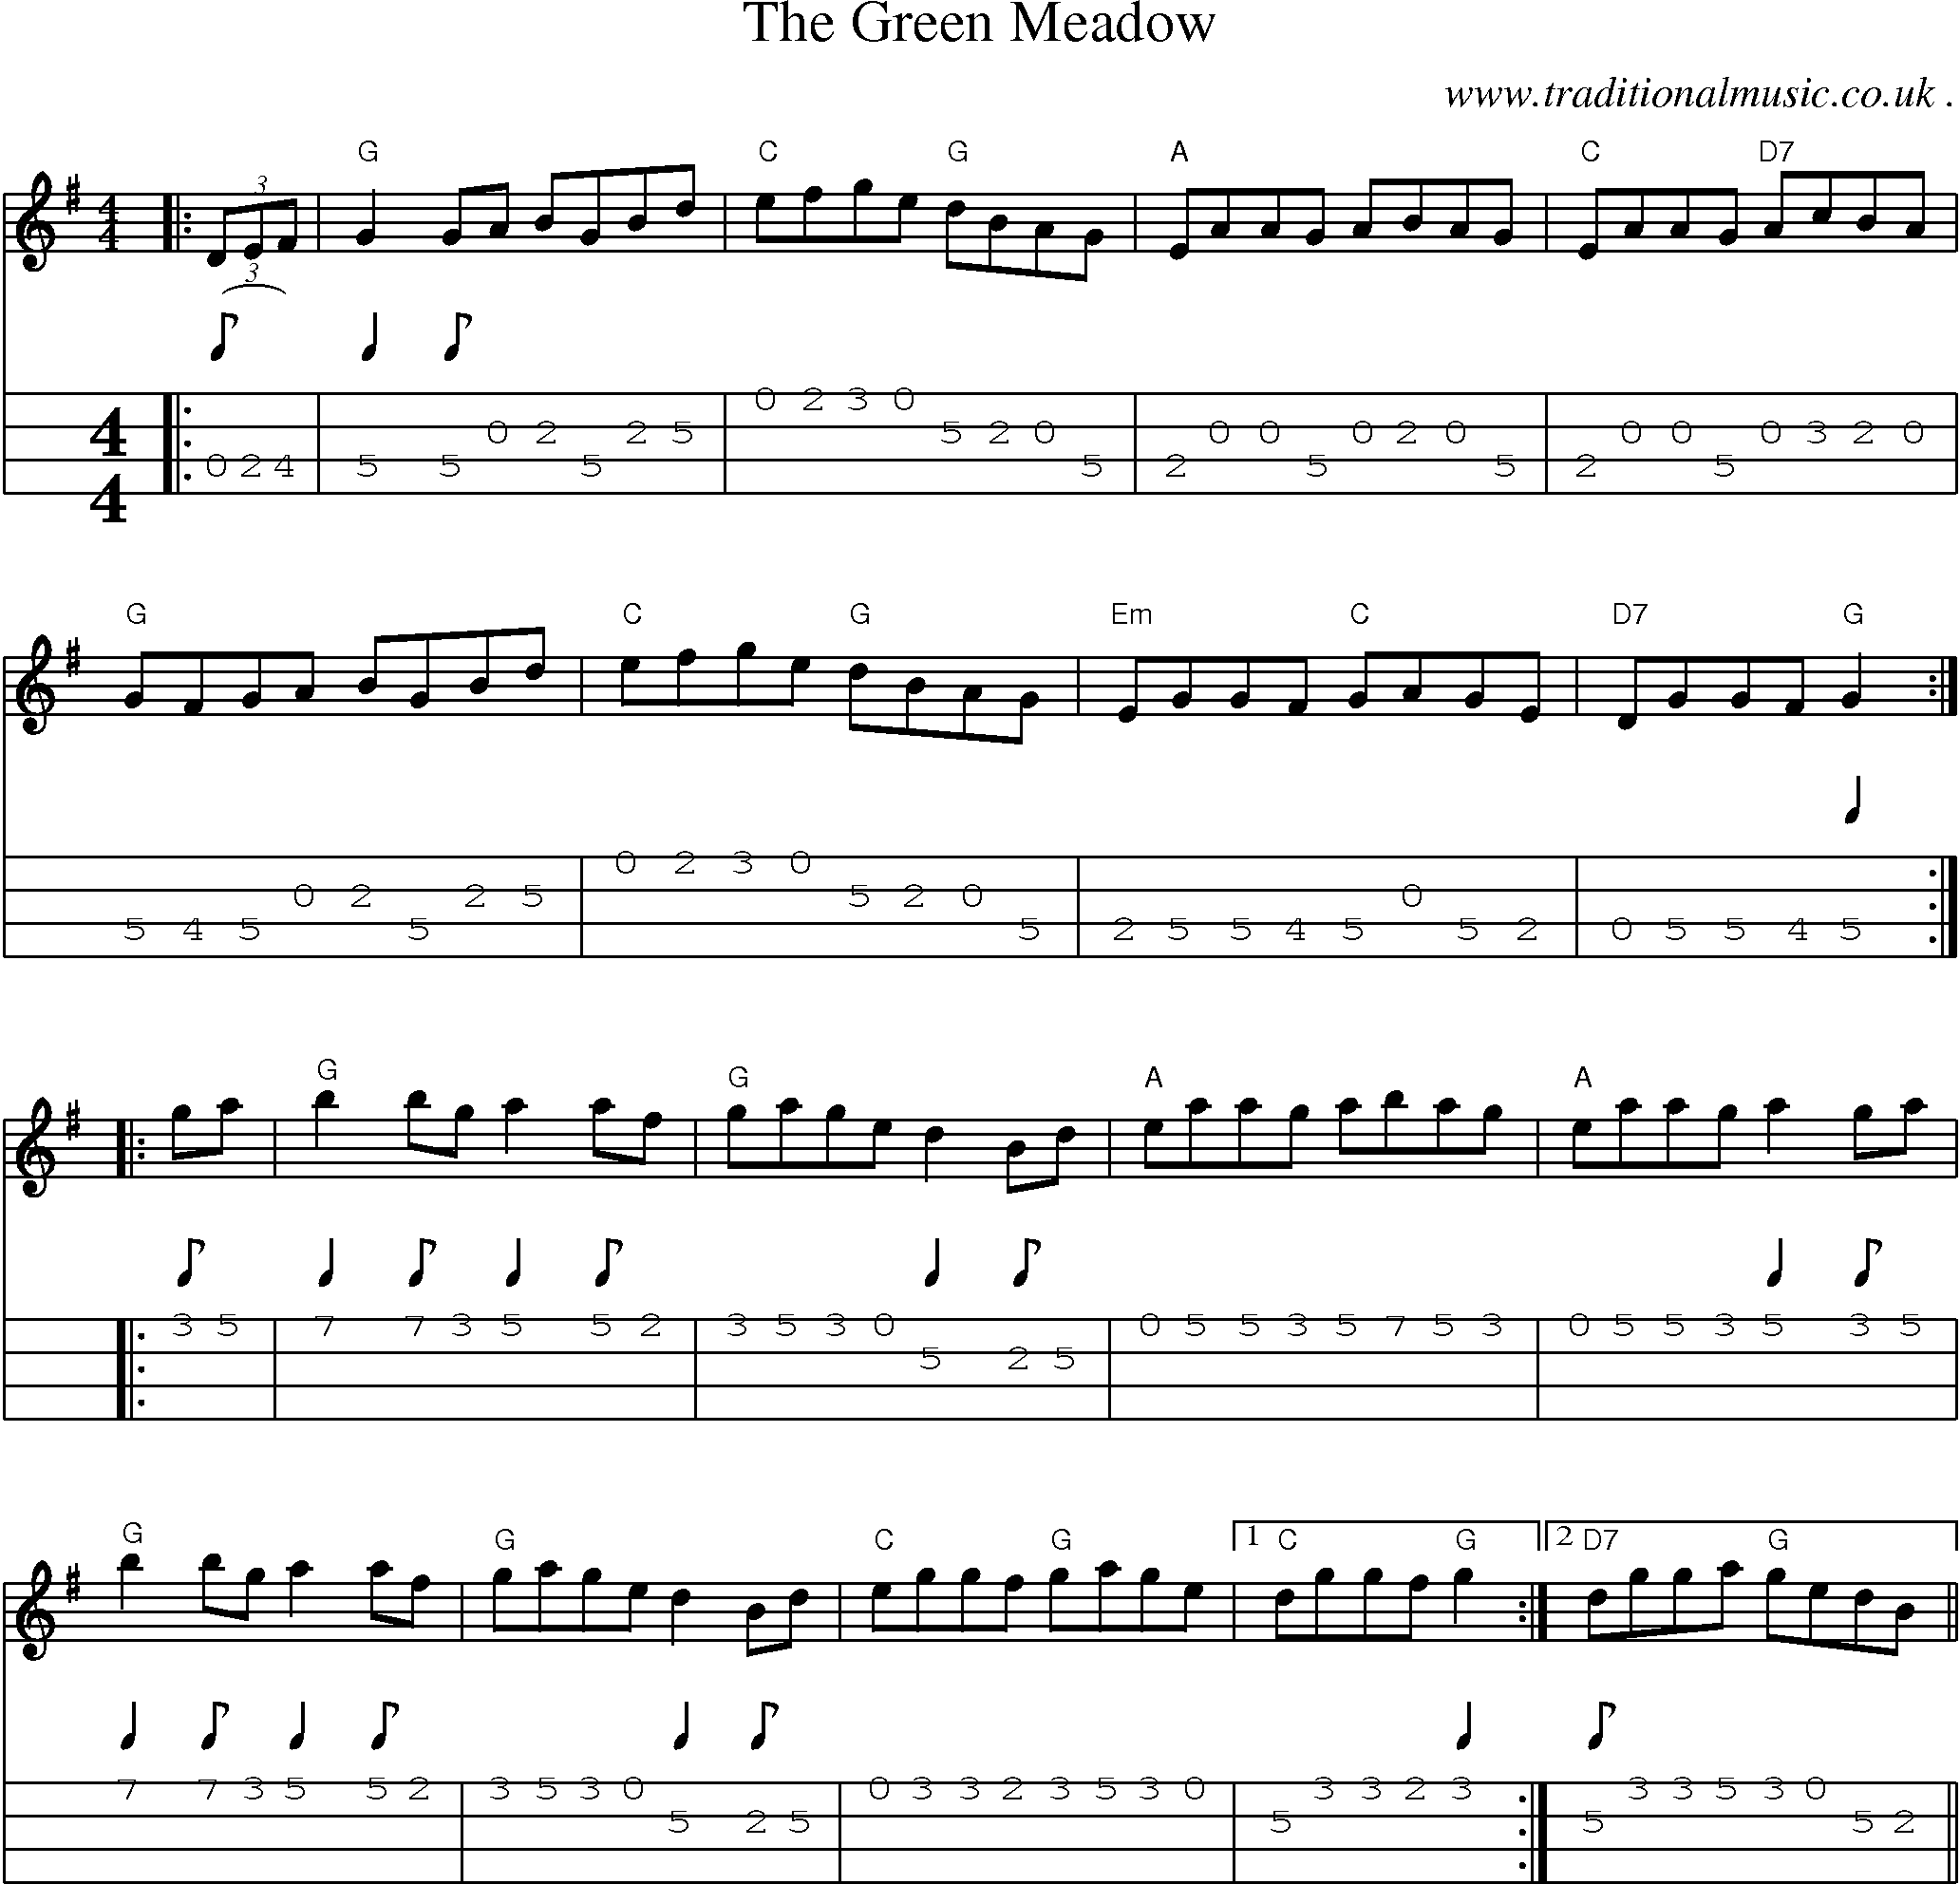 Music Score and Guitar Tabs for The Green Meadow